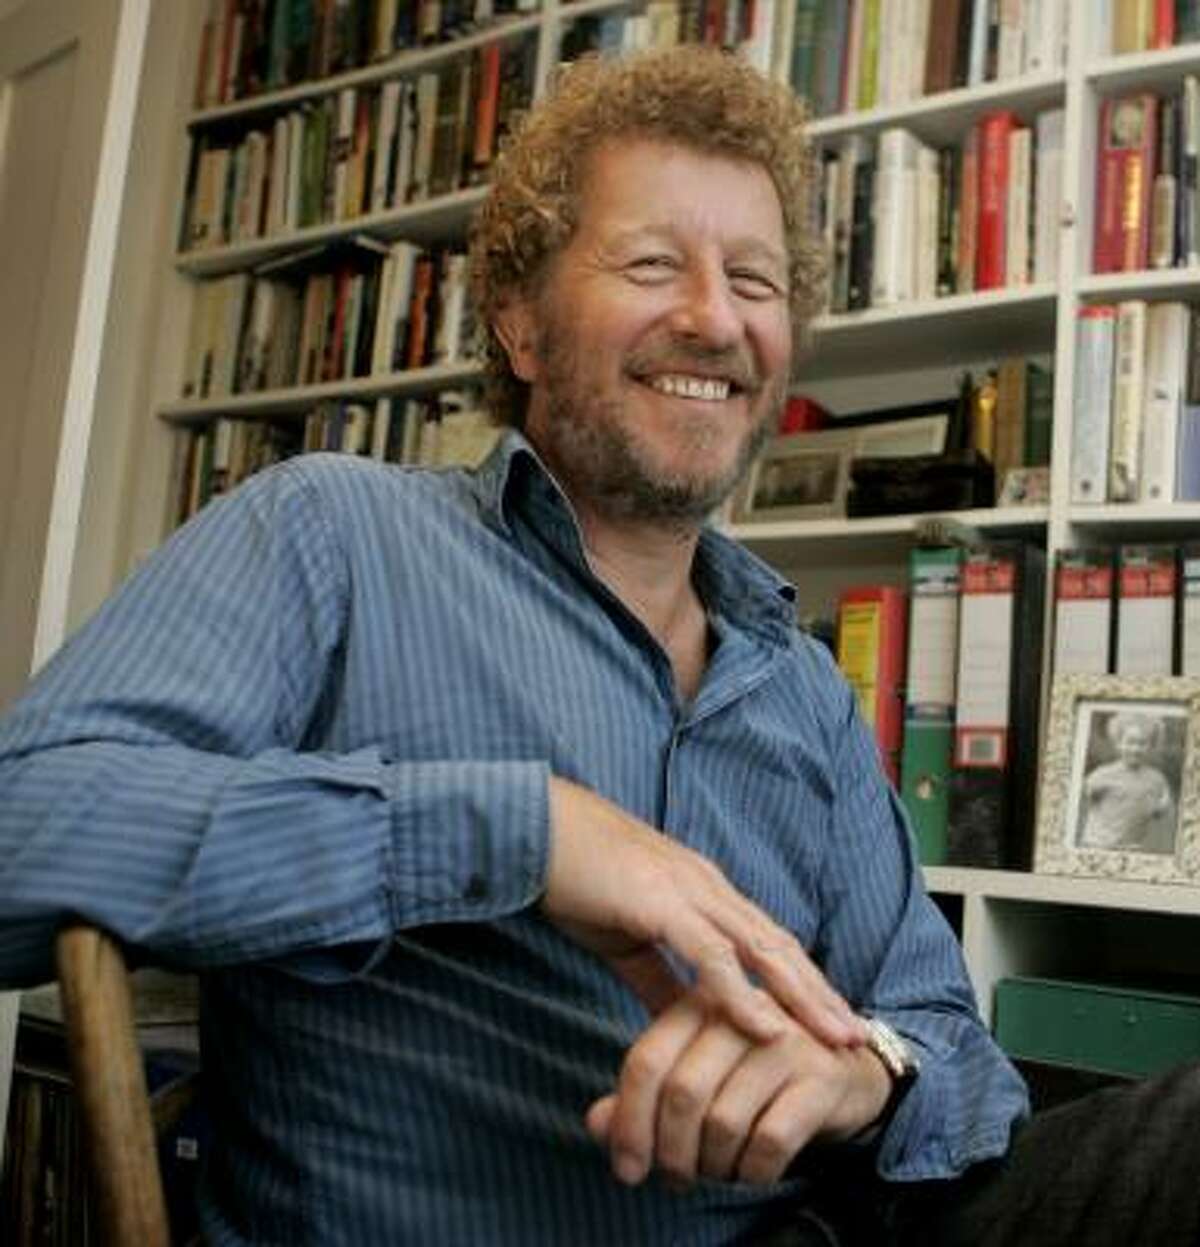 Authorized by Ian Fleming's estate, a James Bond novel by Sebastian Faulks is due to be released in May 2008.